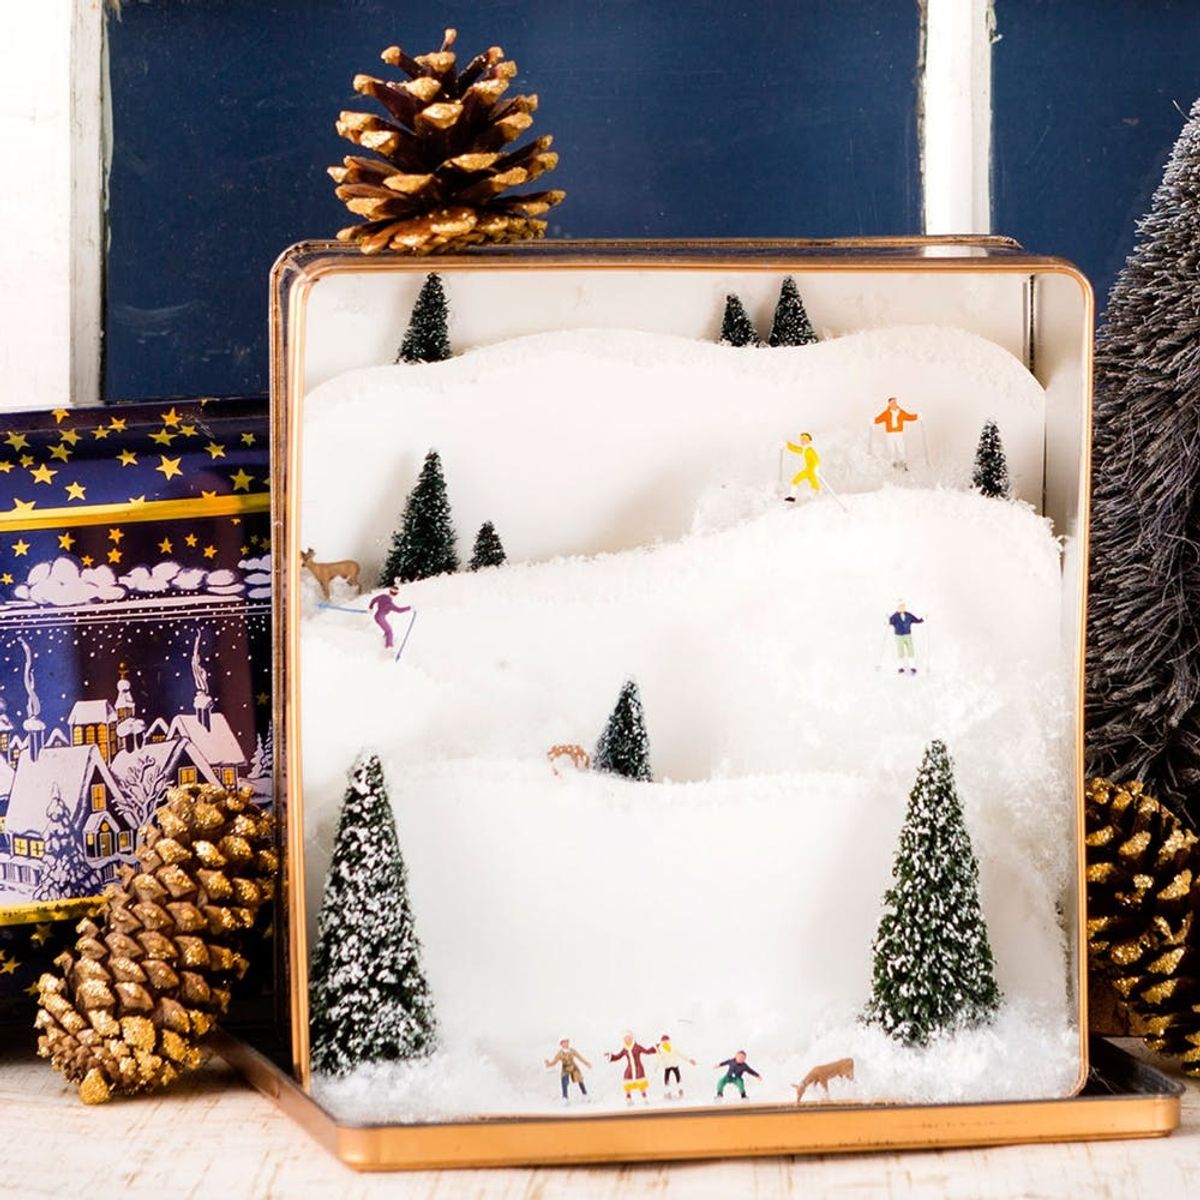 Take Your Mini Obsession One Step Further With a Tin Box Ski Slope